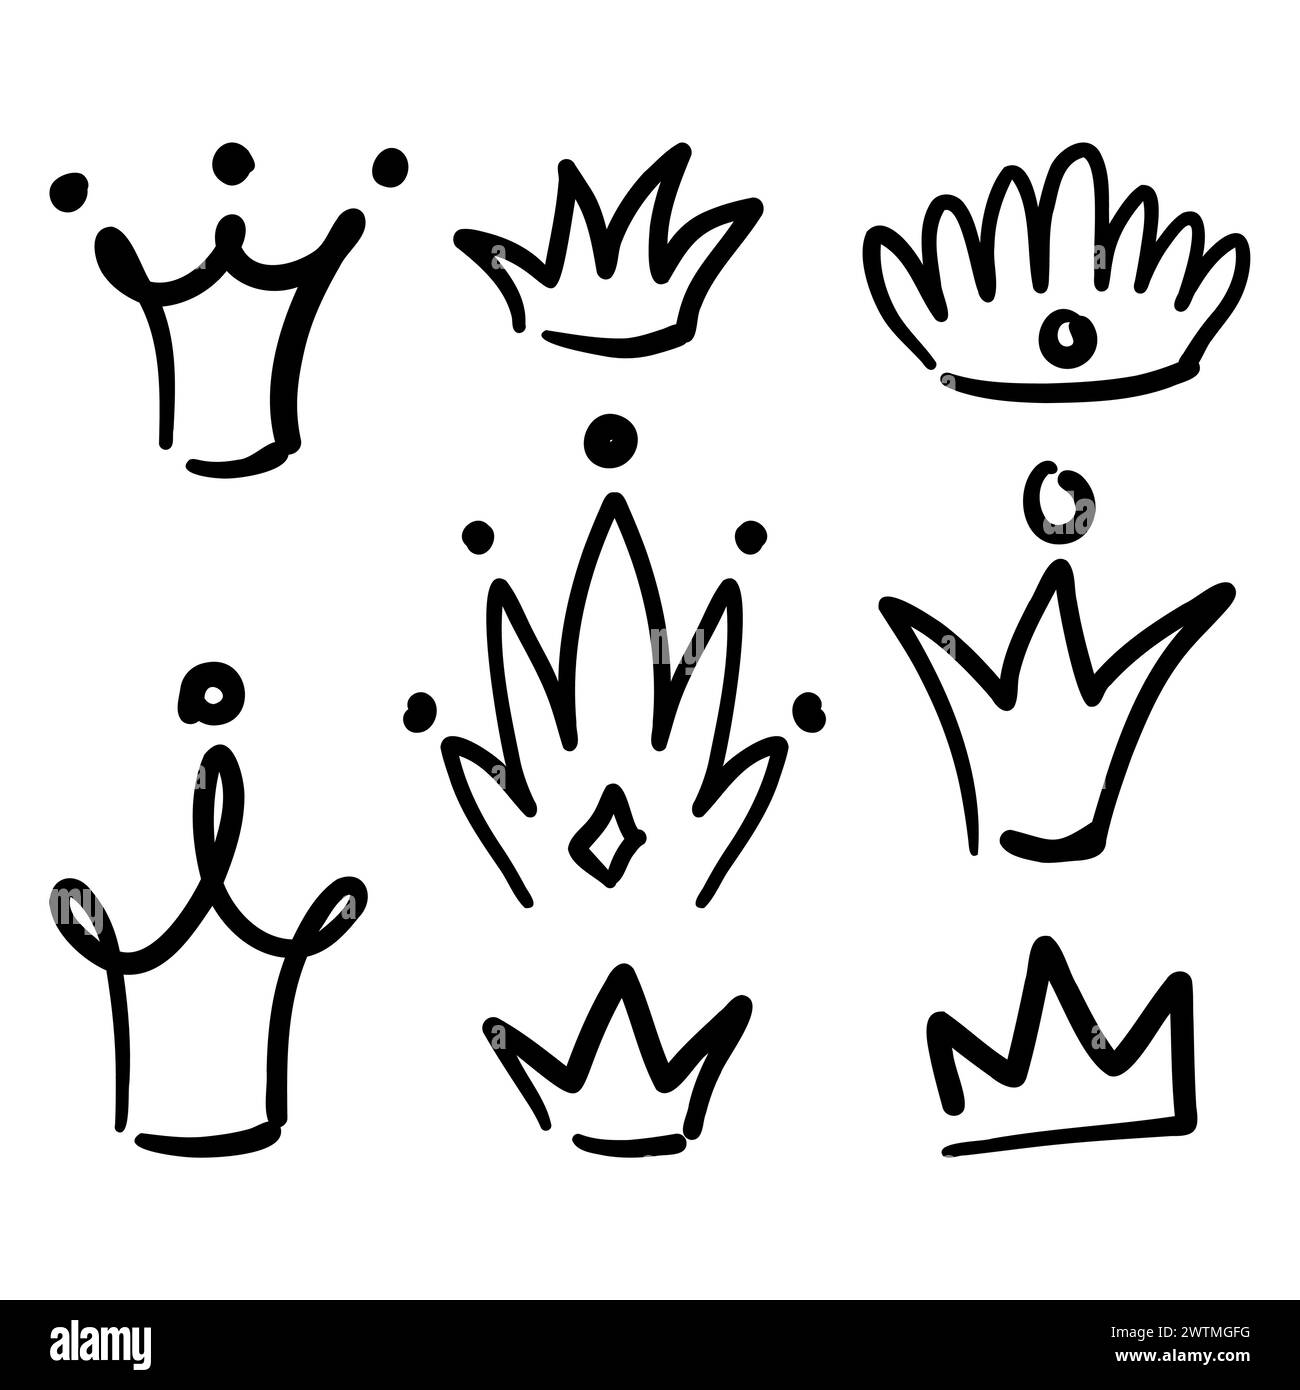 Crowns doodle design set. Retro badges. Hand drawn isolated emblem with royal symbols. Crown for queen, princess, king, prince. Stock Vector